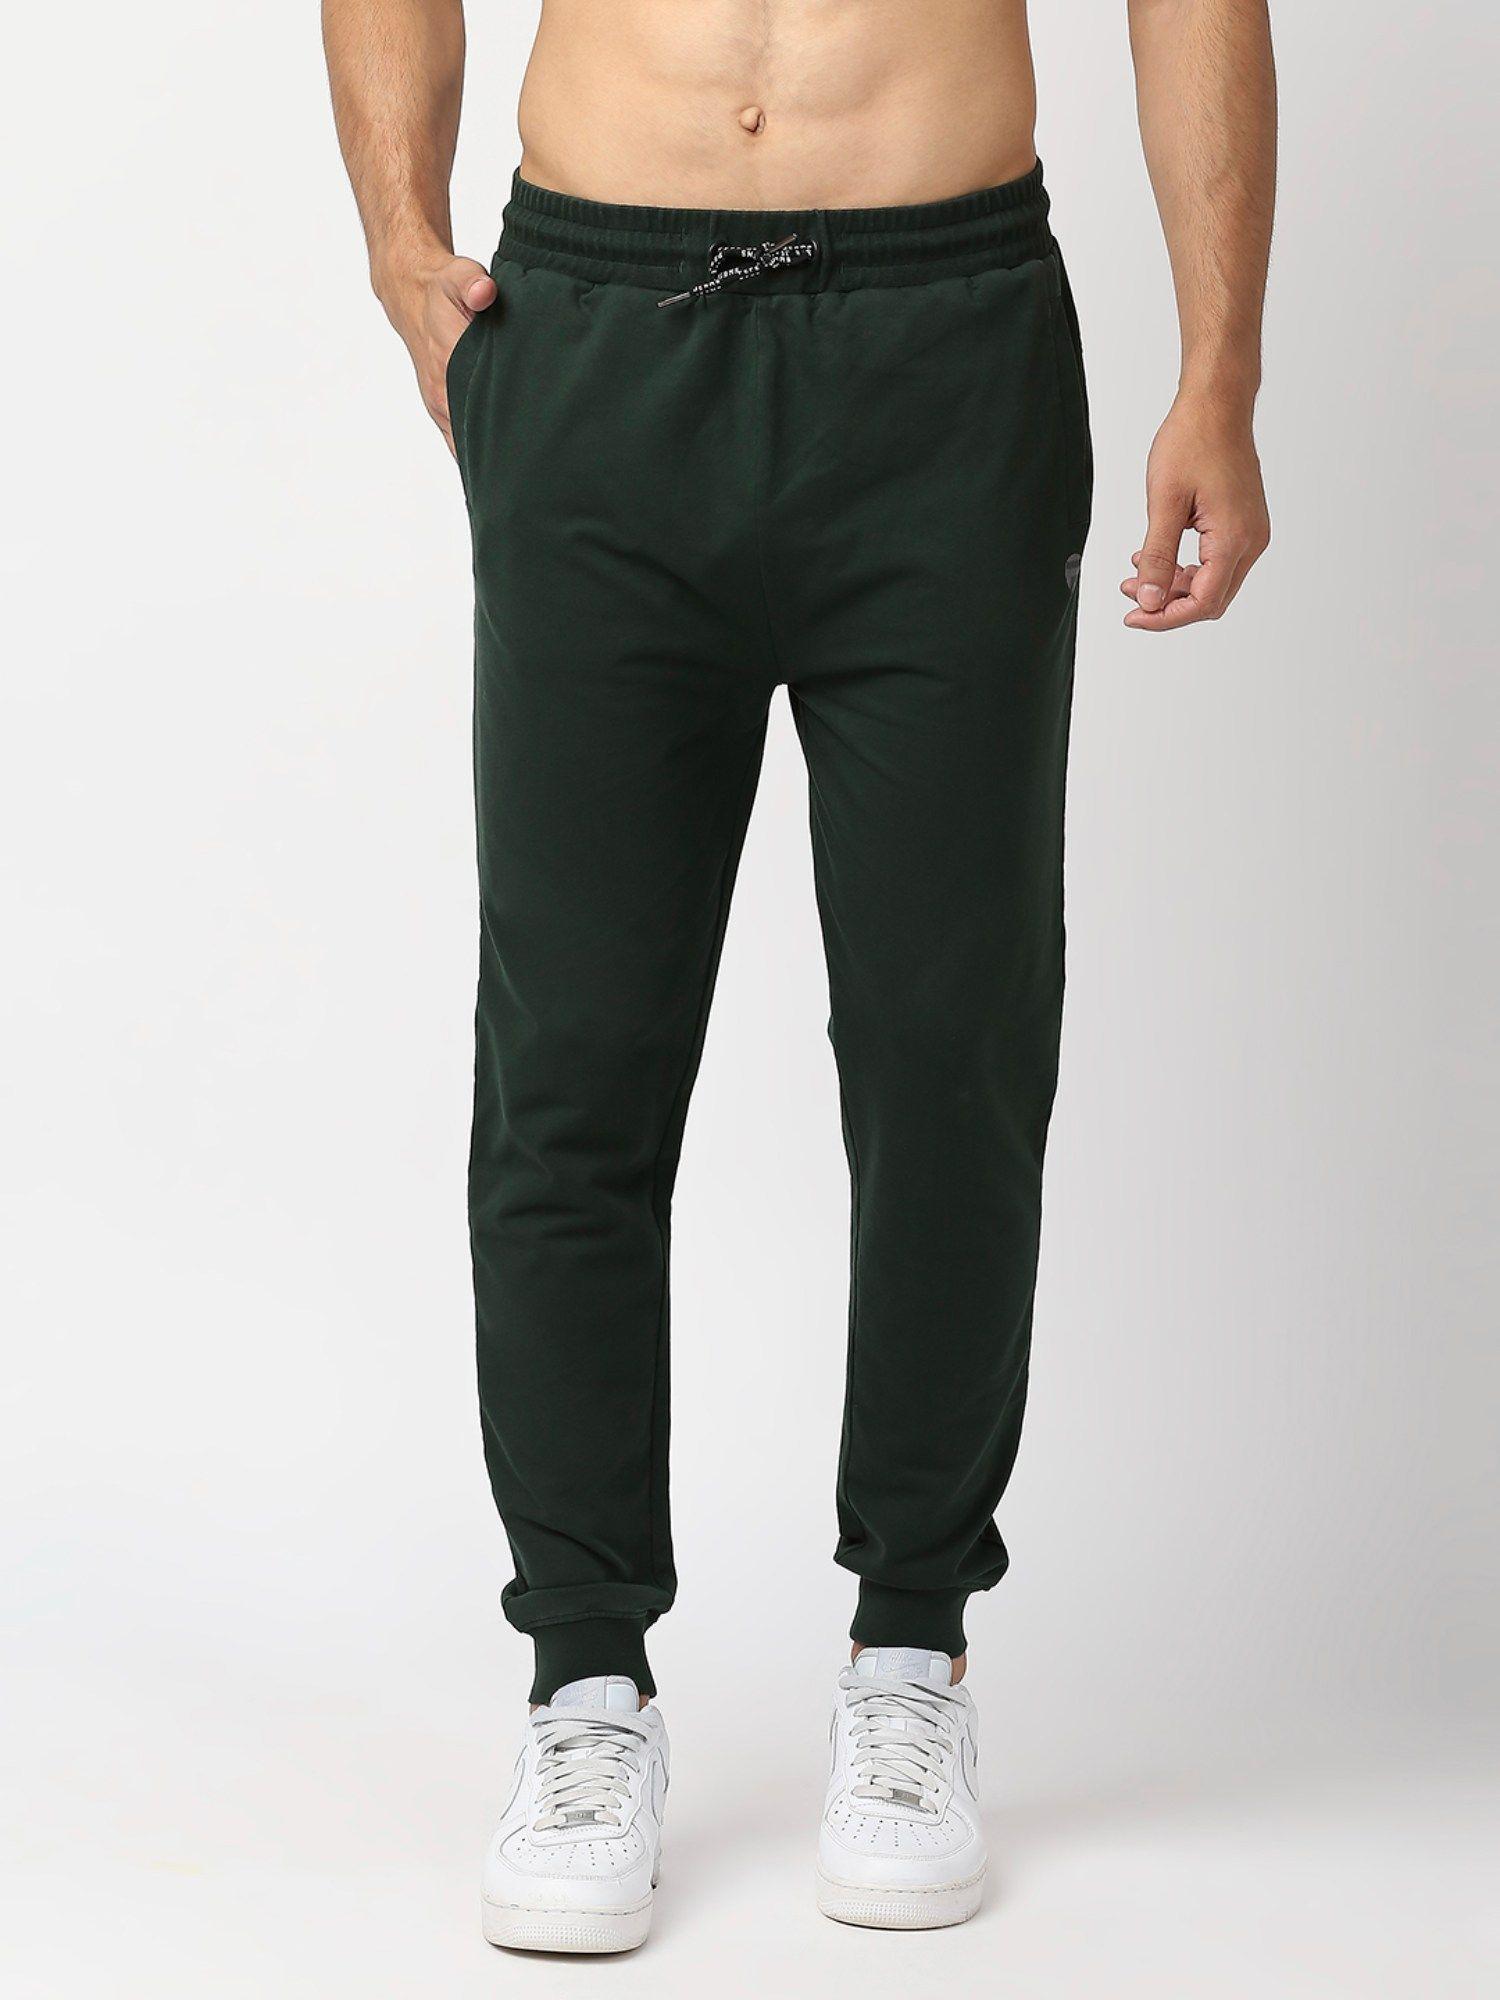 wagner placement green joggers